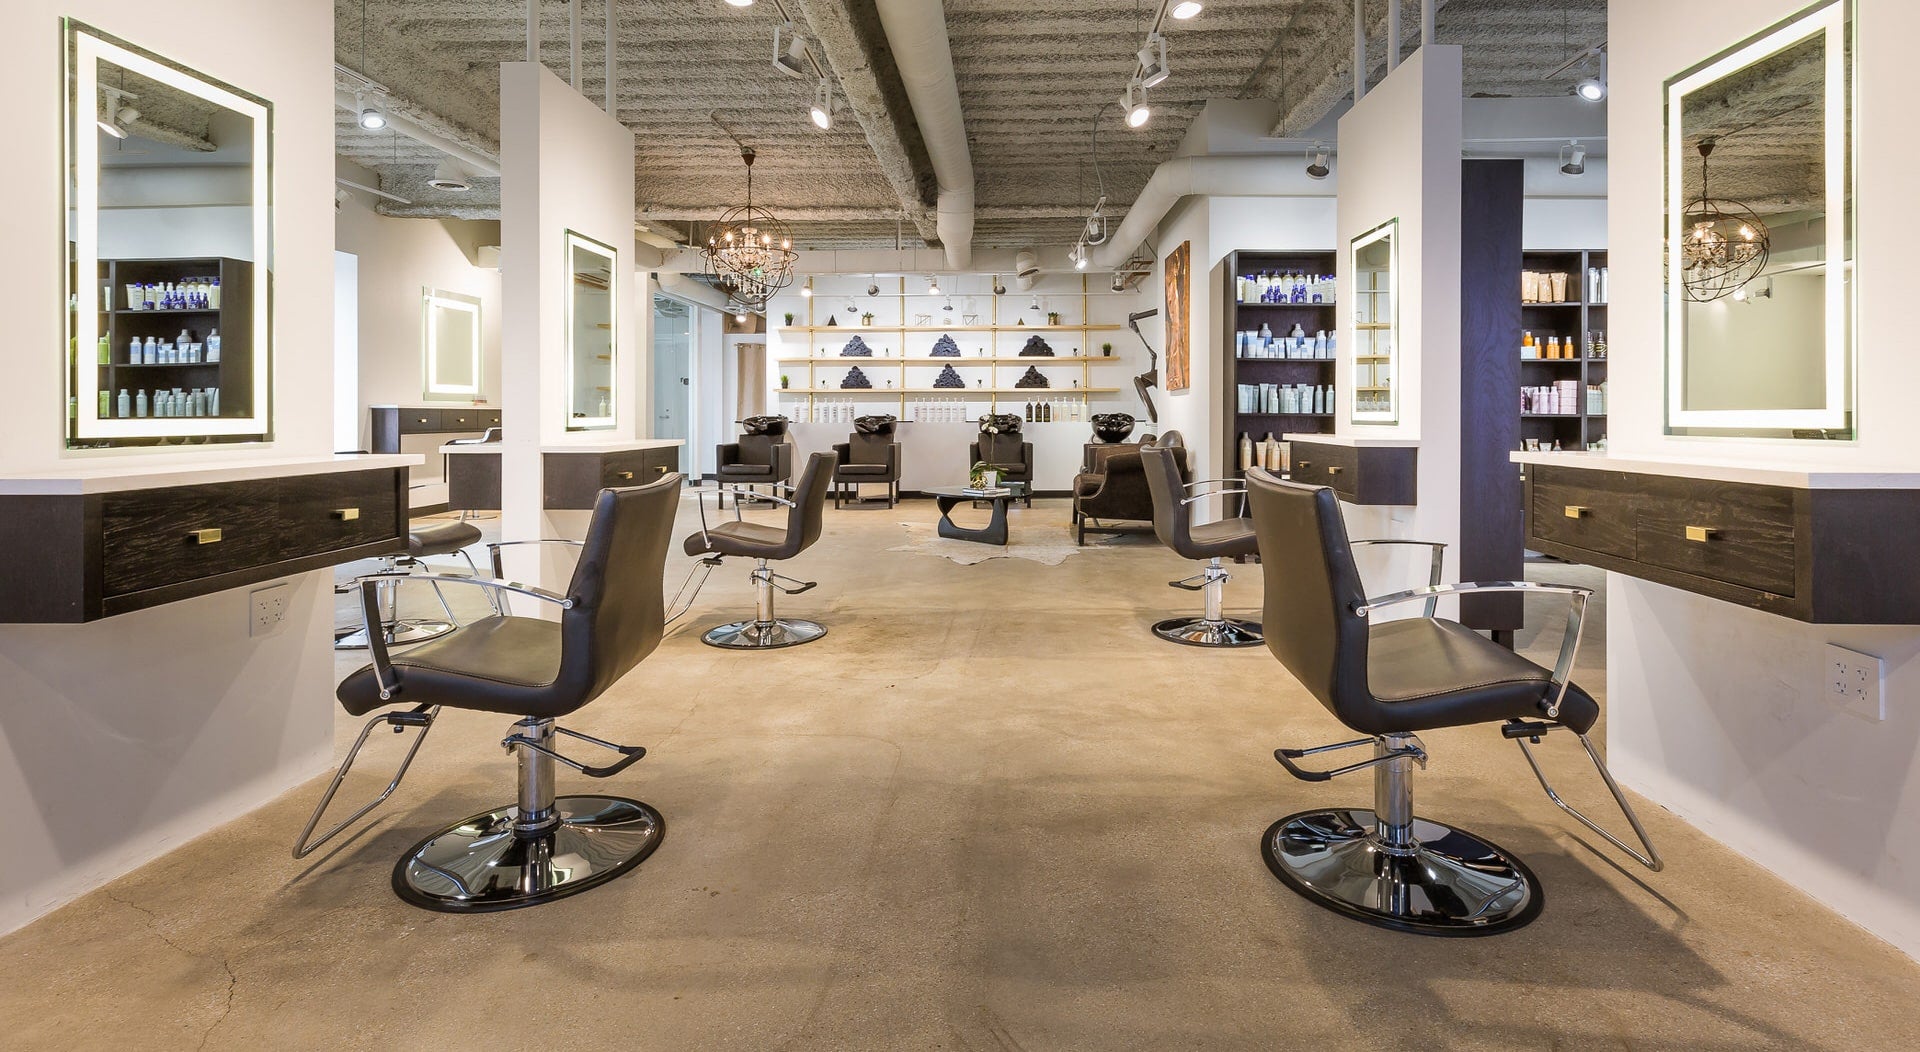 How to Make Your Hair Salon Stand Out